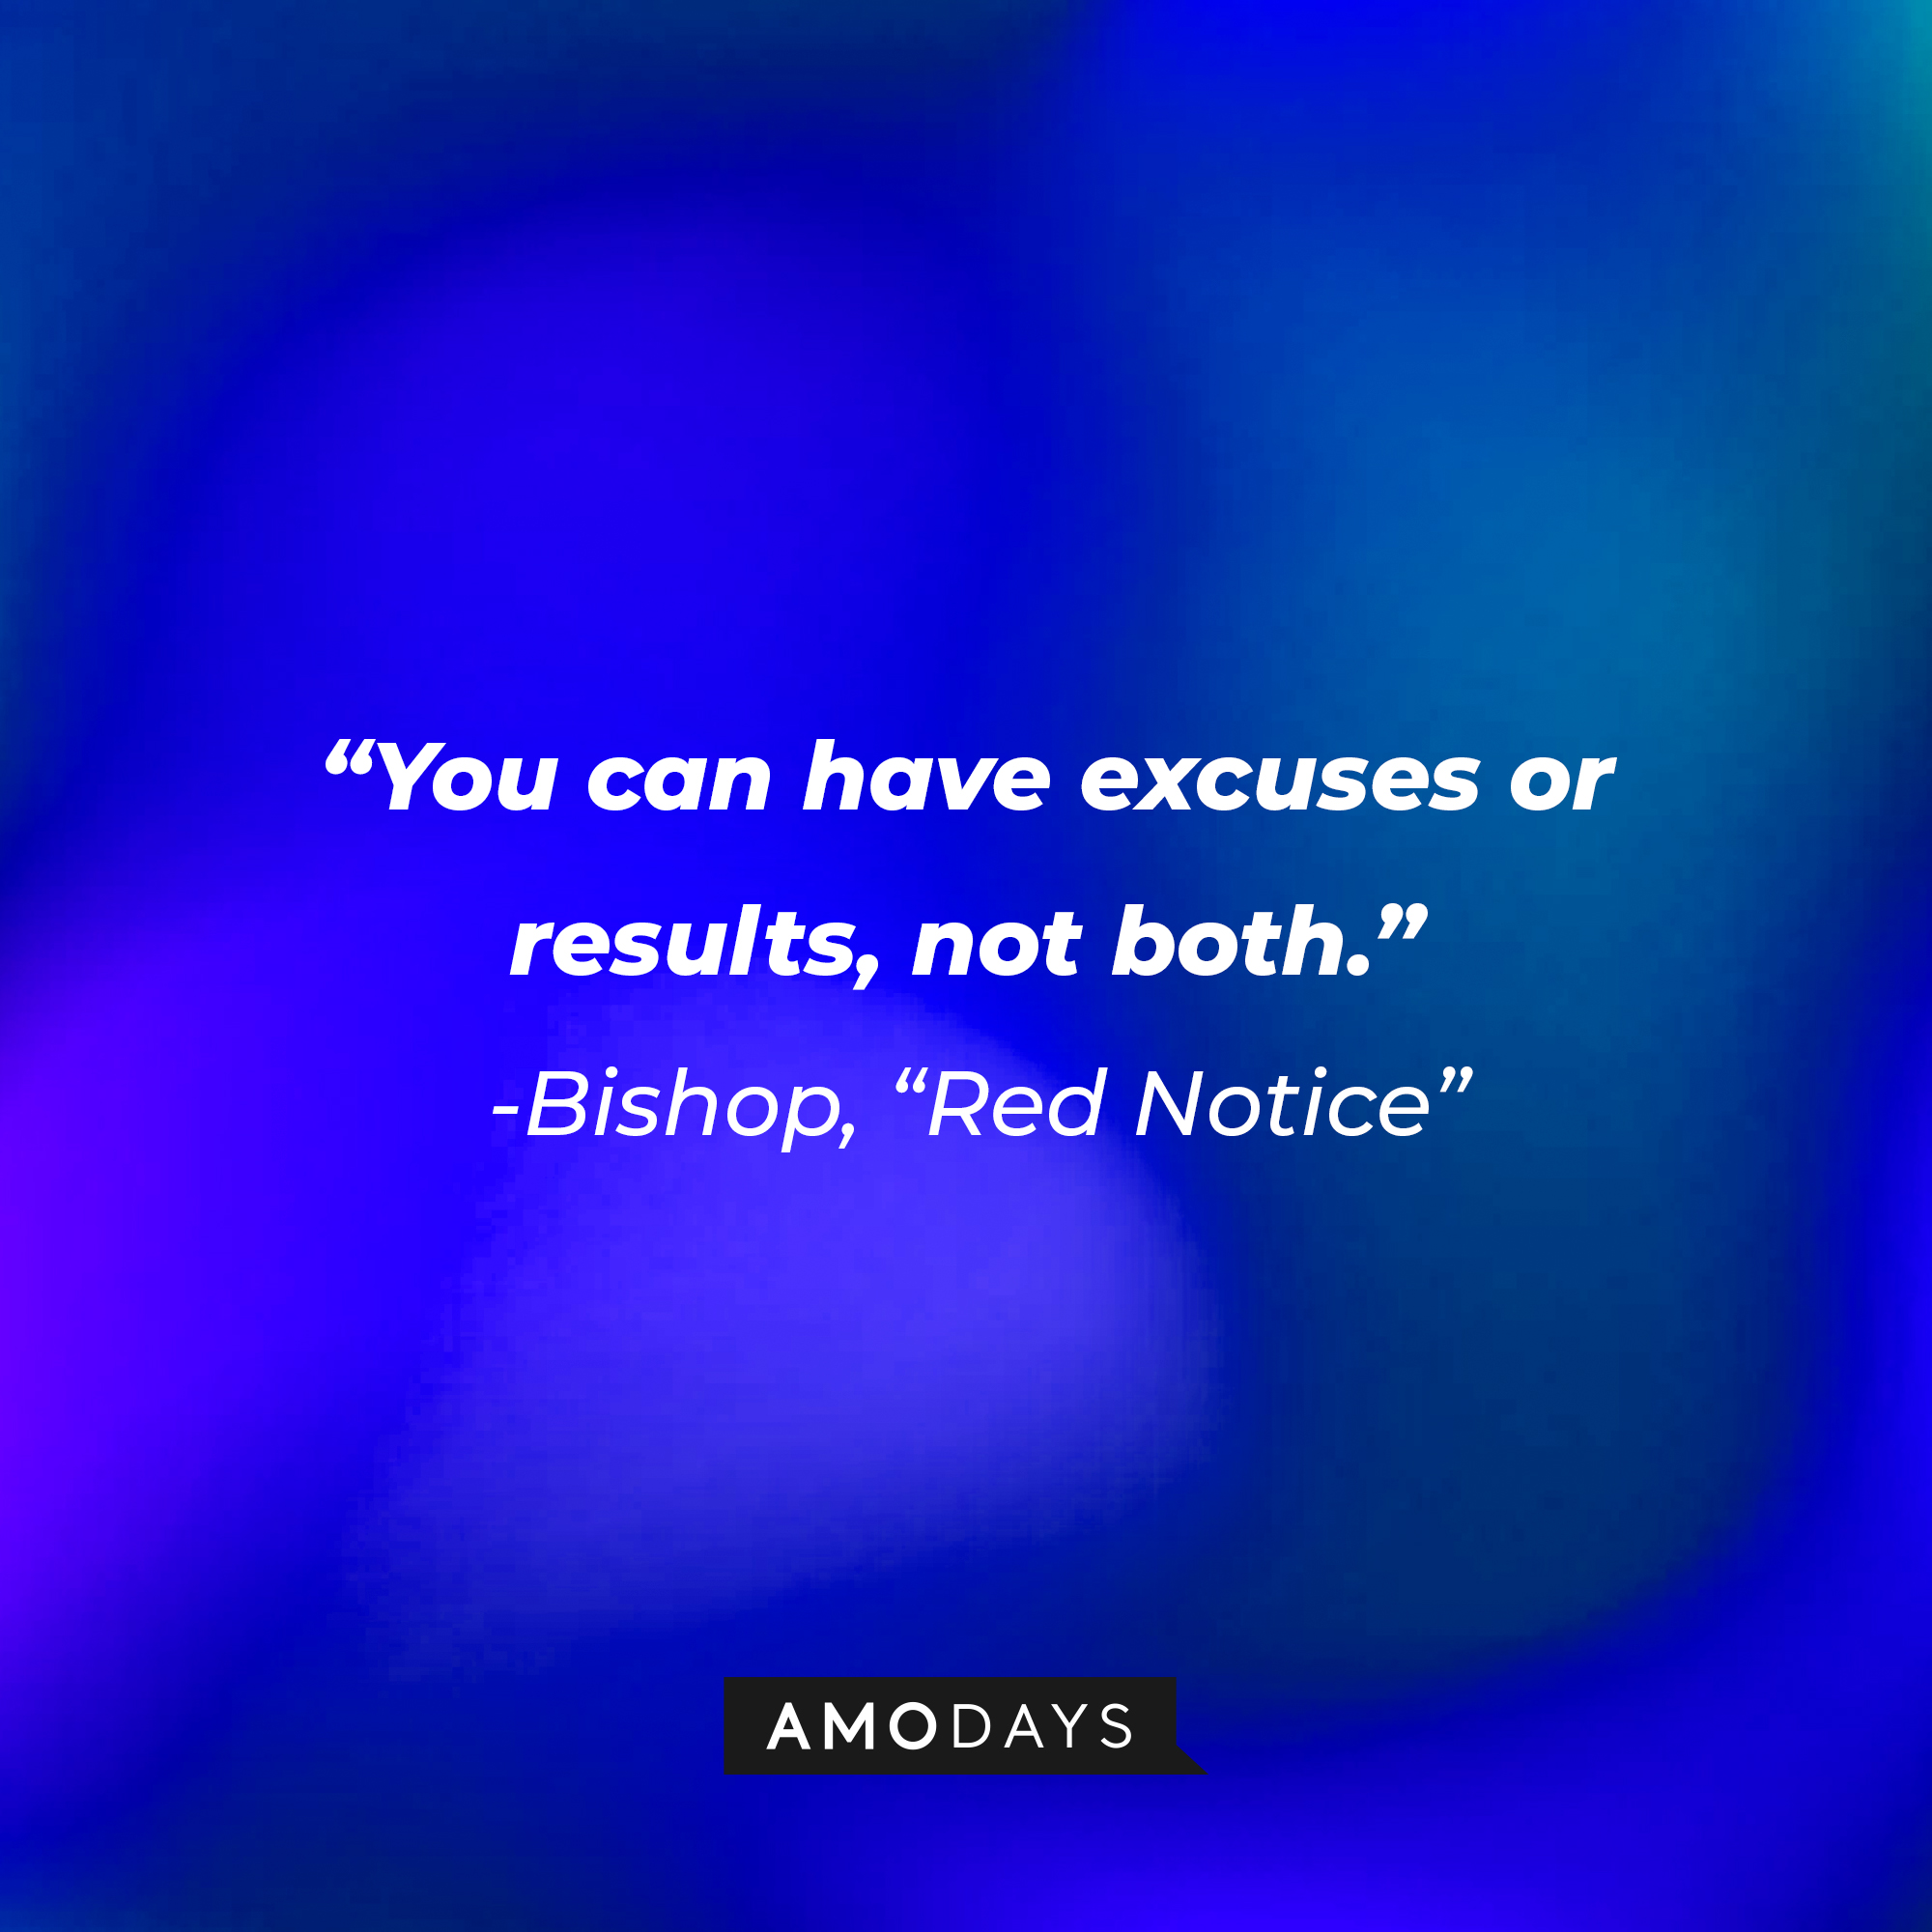 Bishop's quote from "Red Notice:" "You can have excuses or results, not both." | Source: AmoDays